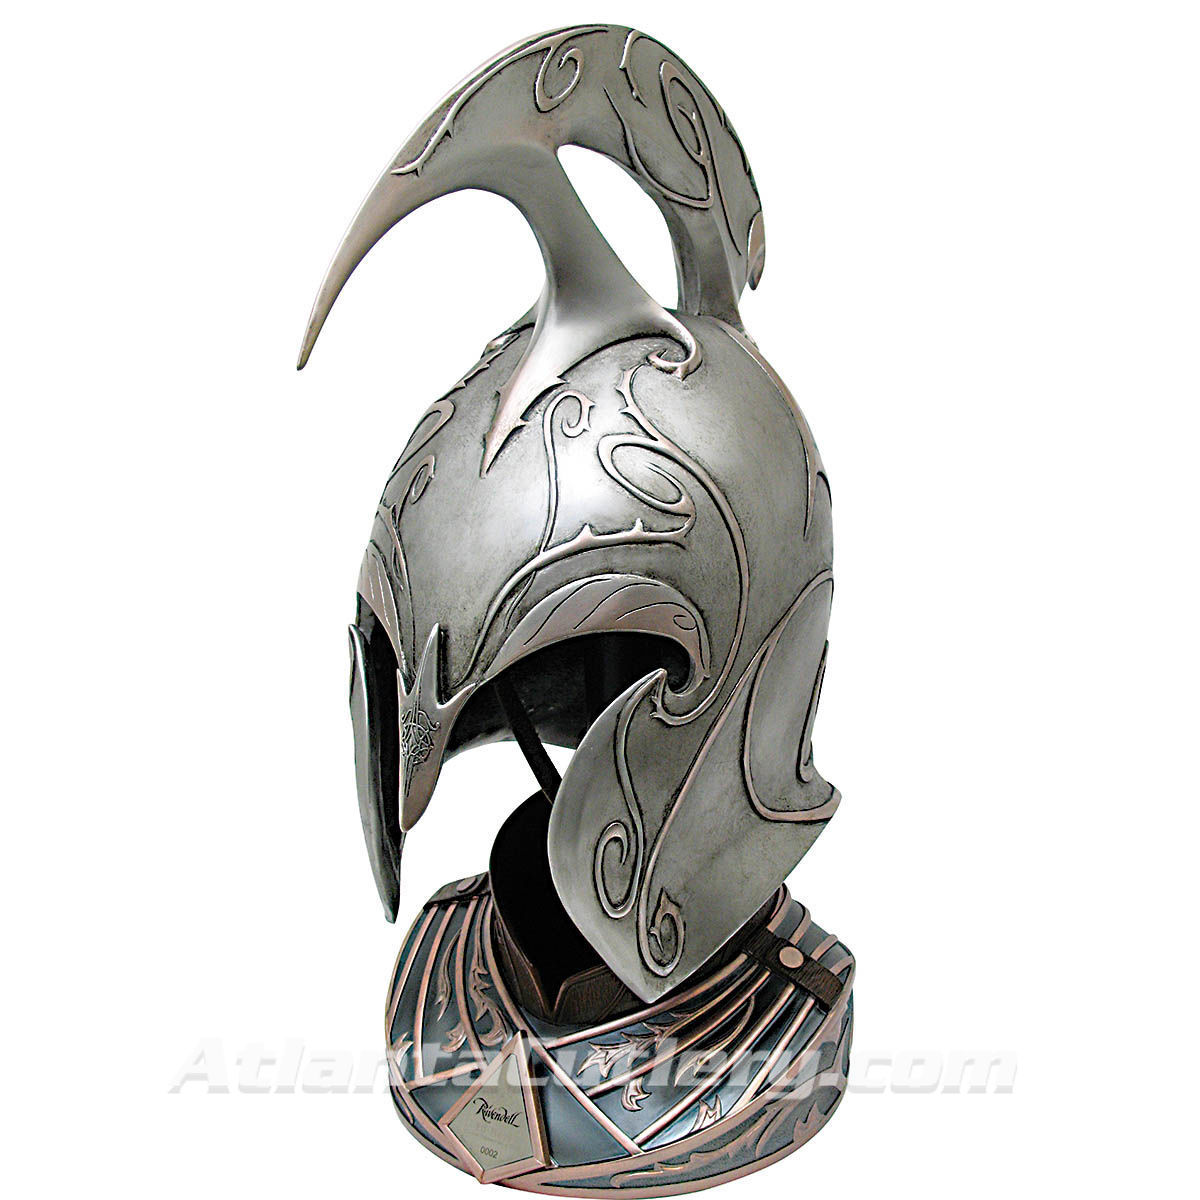 Hobbit Rivendell Elf Helm licensed prop replica includes stand and has aged finish